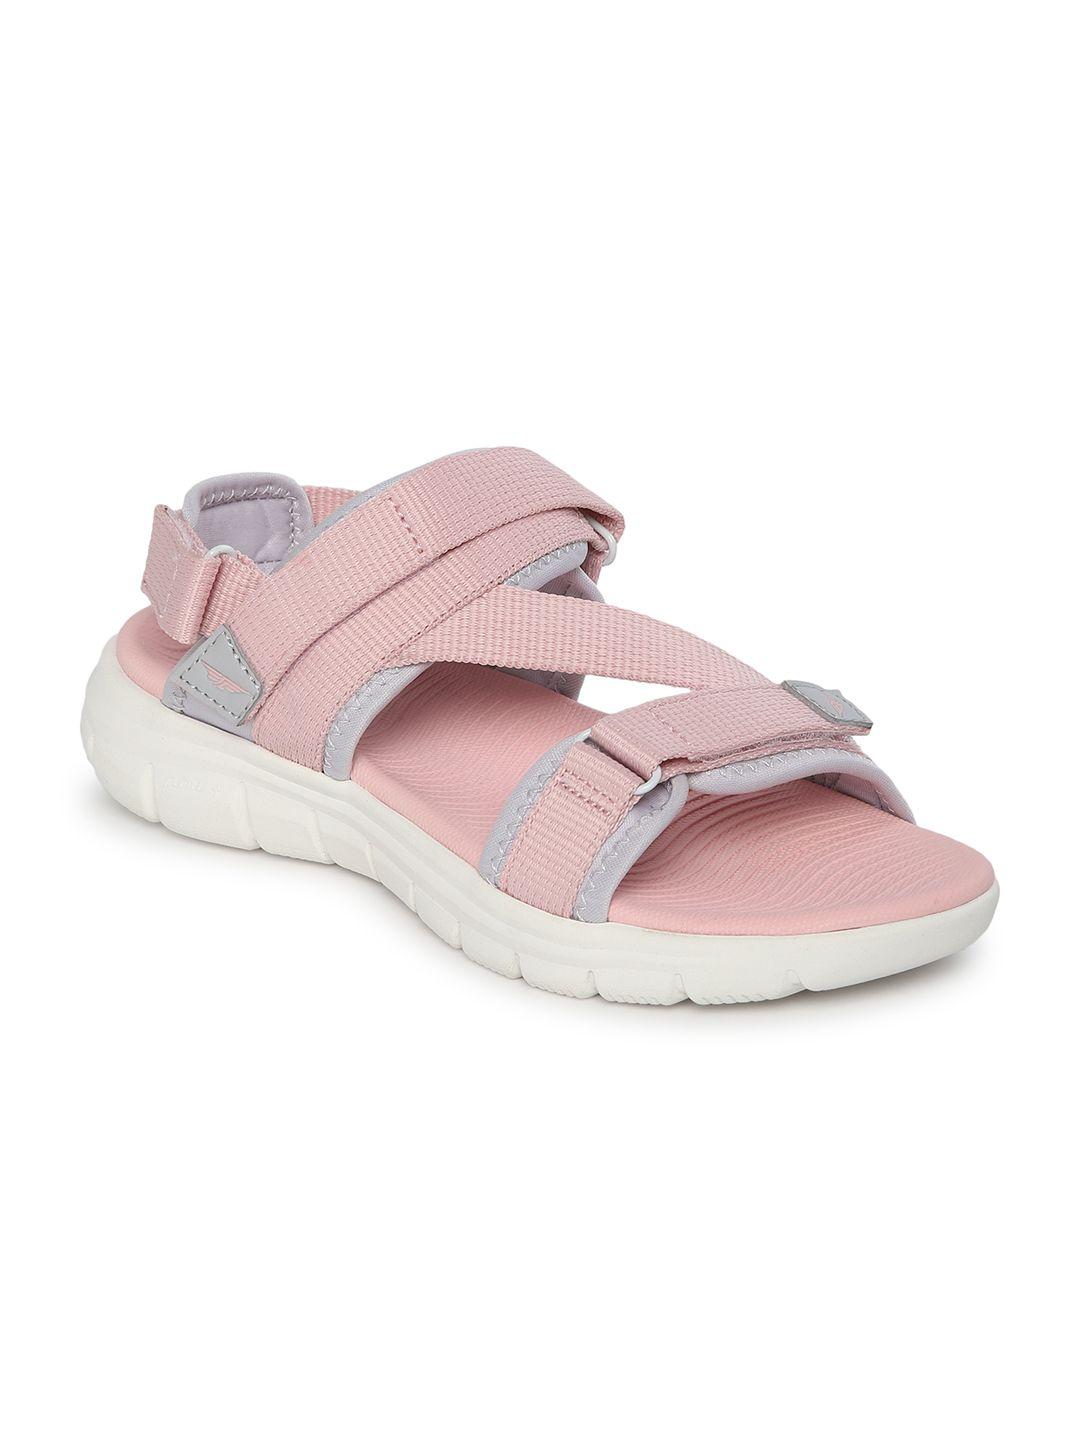 red tape women pink sports sandals